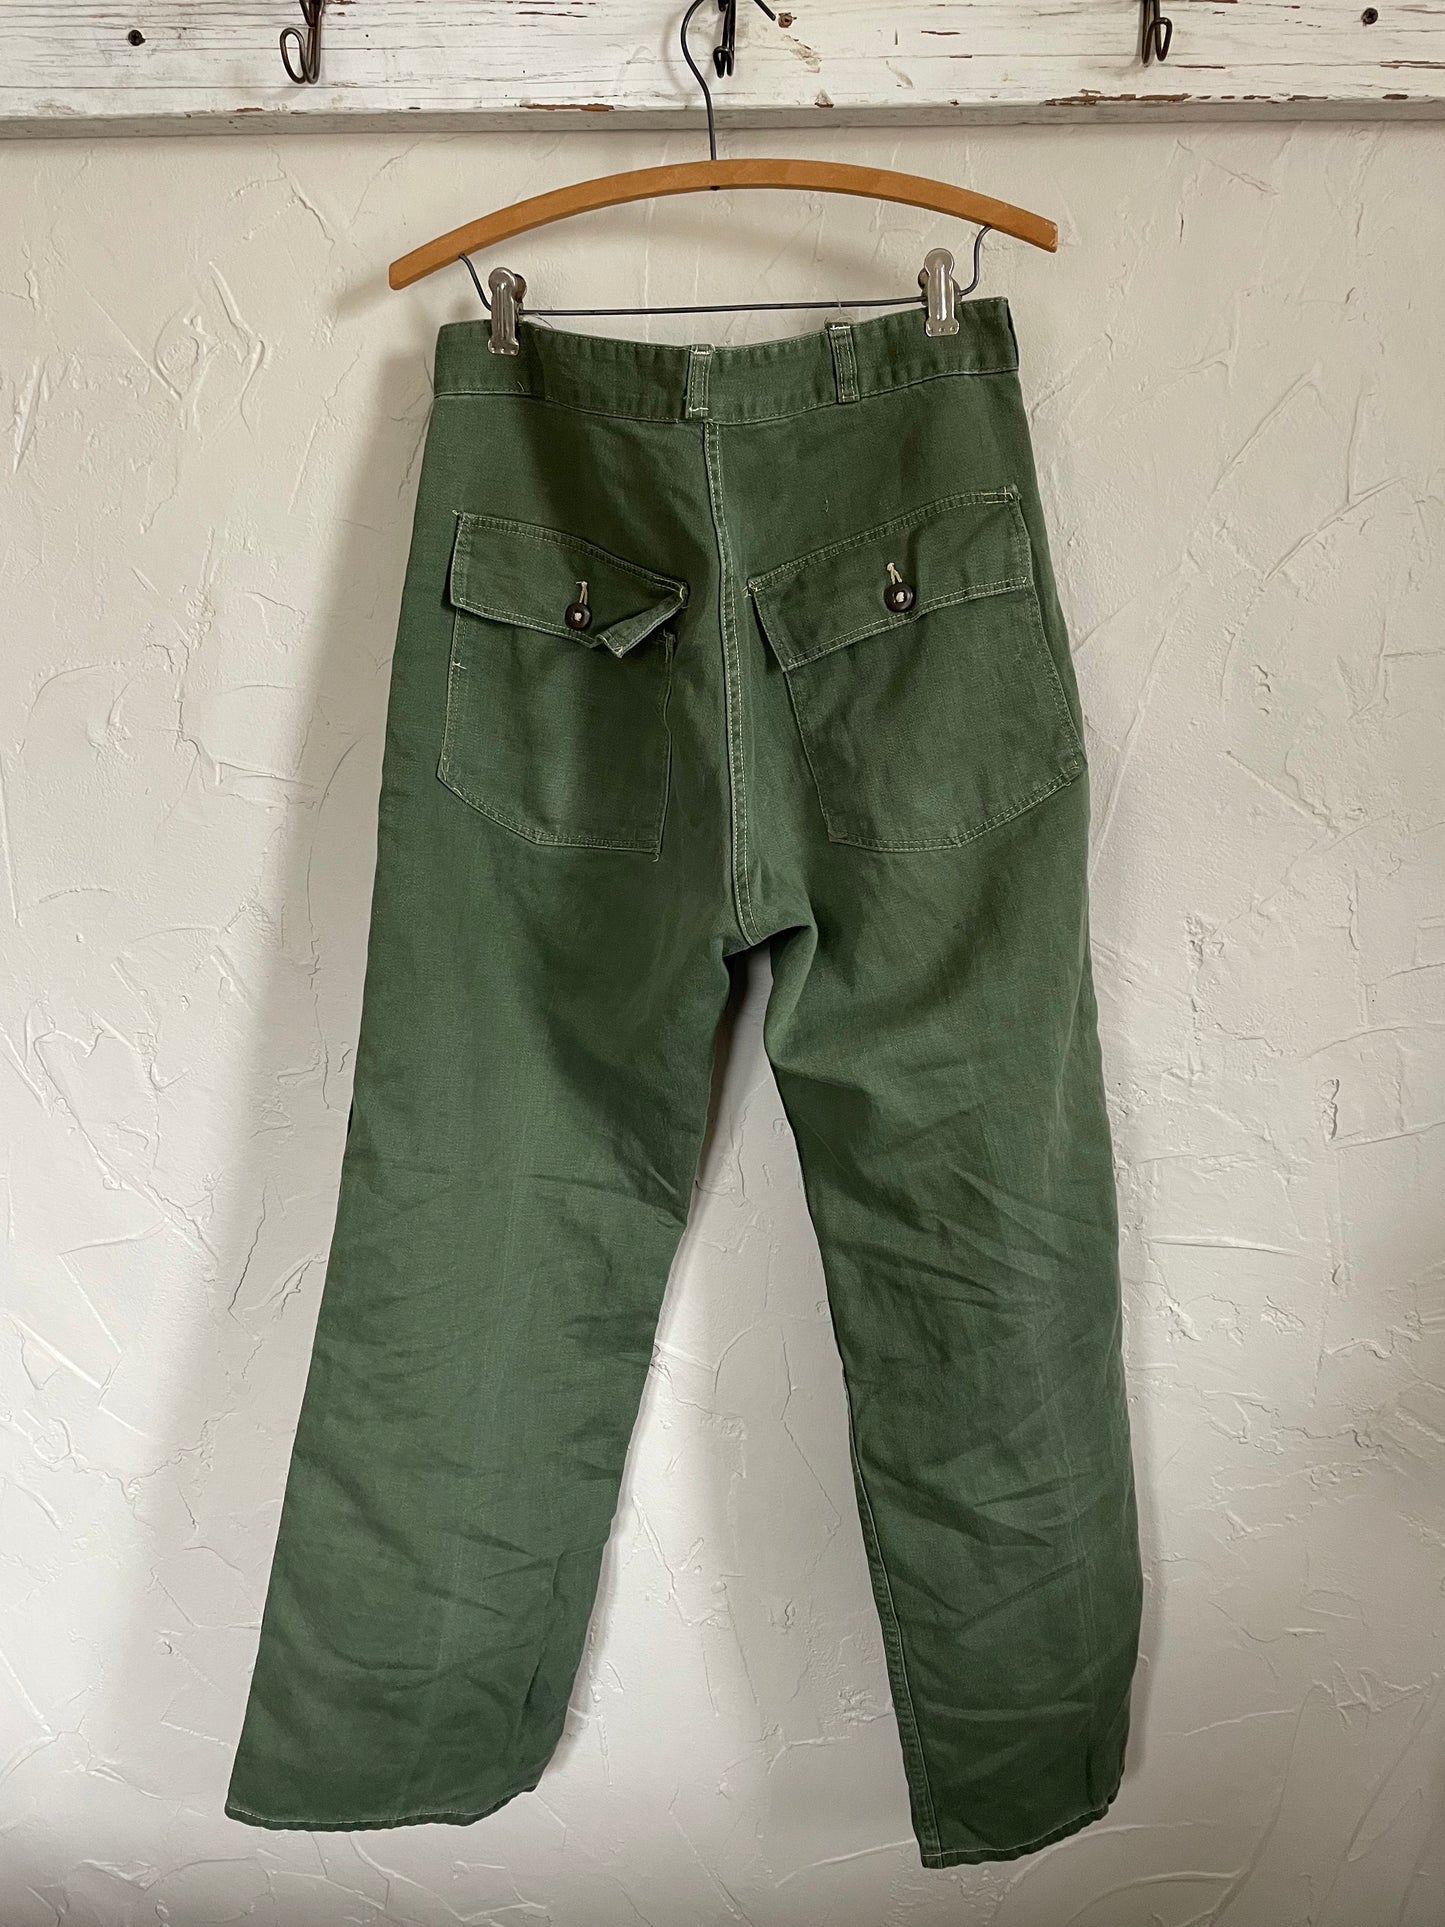 50s/60s Private Purchase OG-107 Army Fatigues